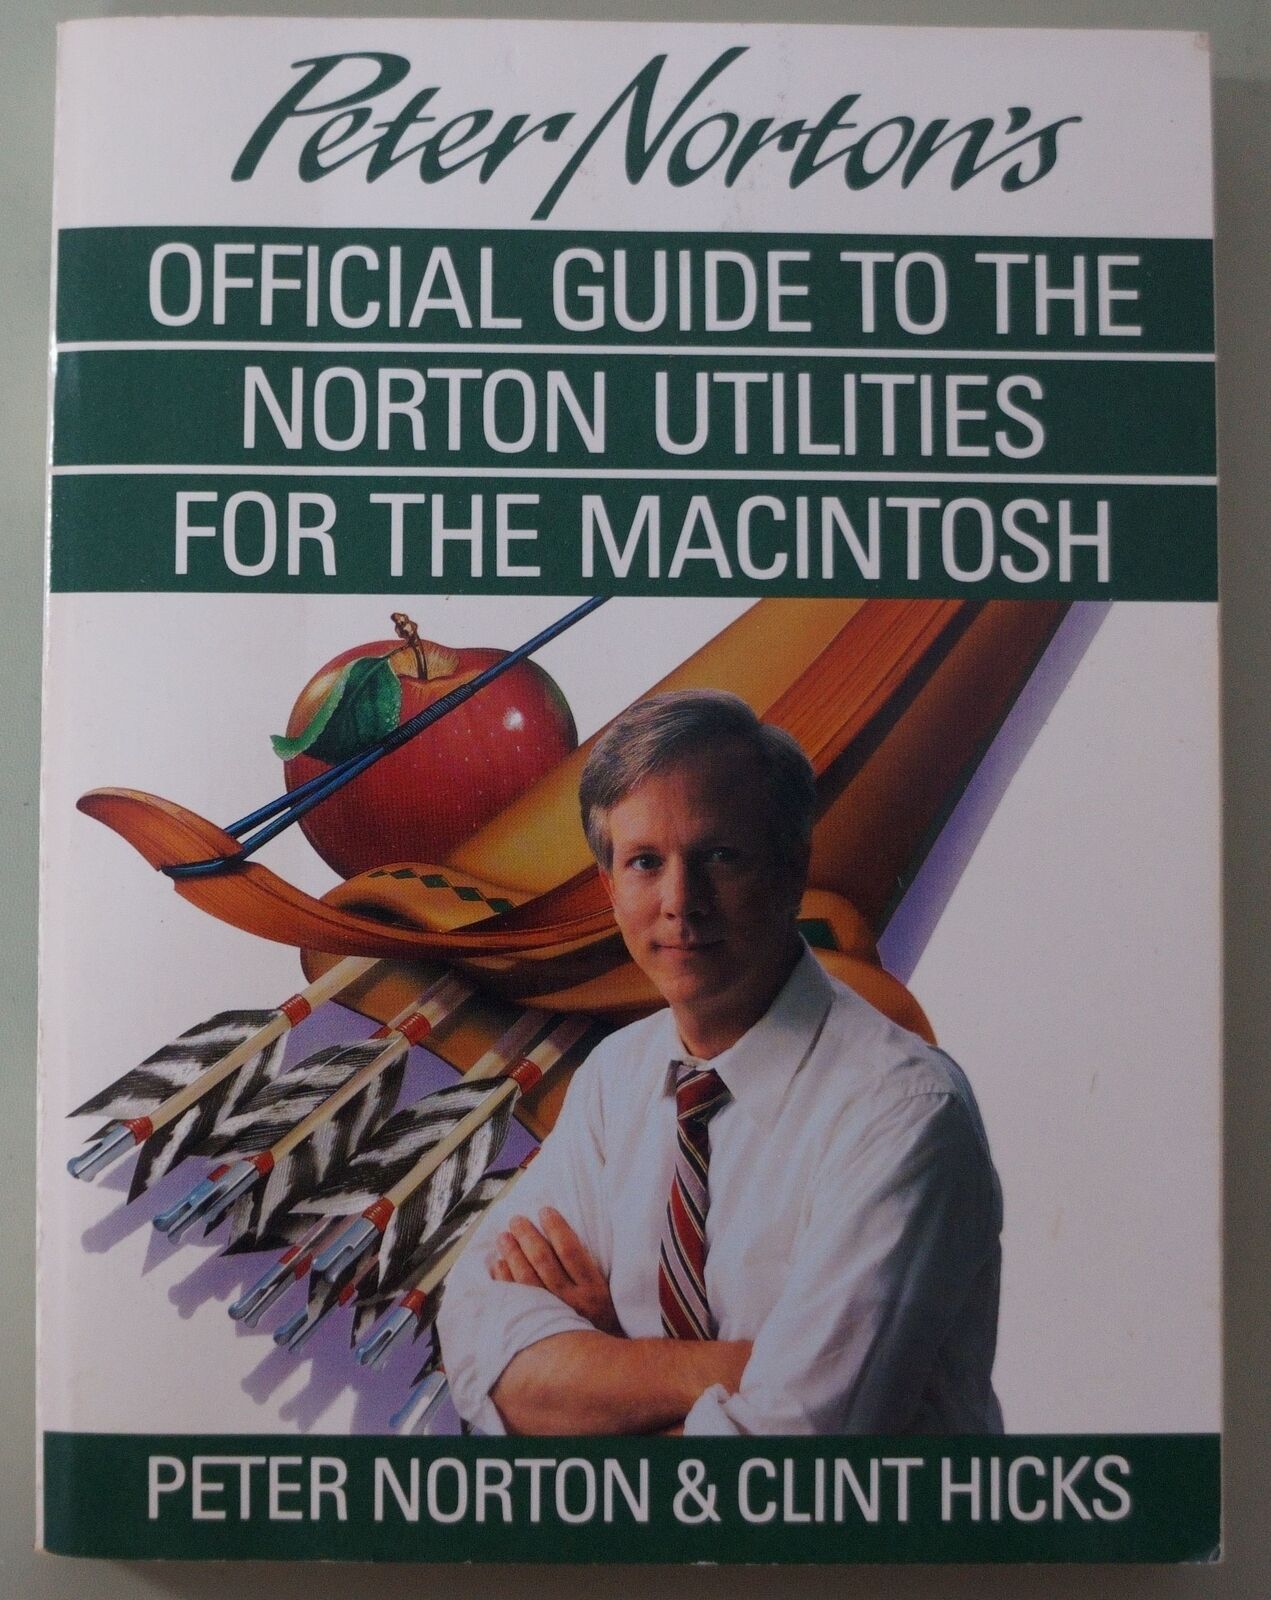 Peter Norton's Official Guide to The Norton Utilities for the Macintosh - 1991